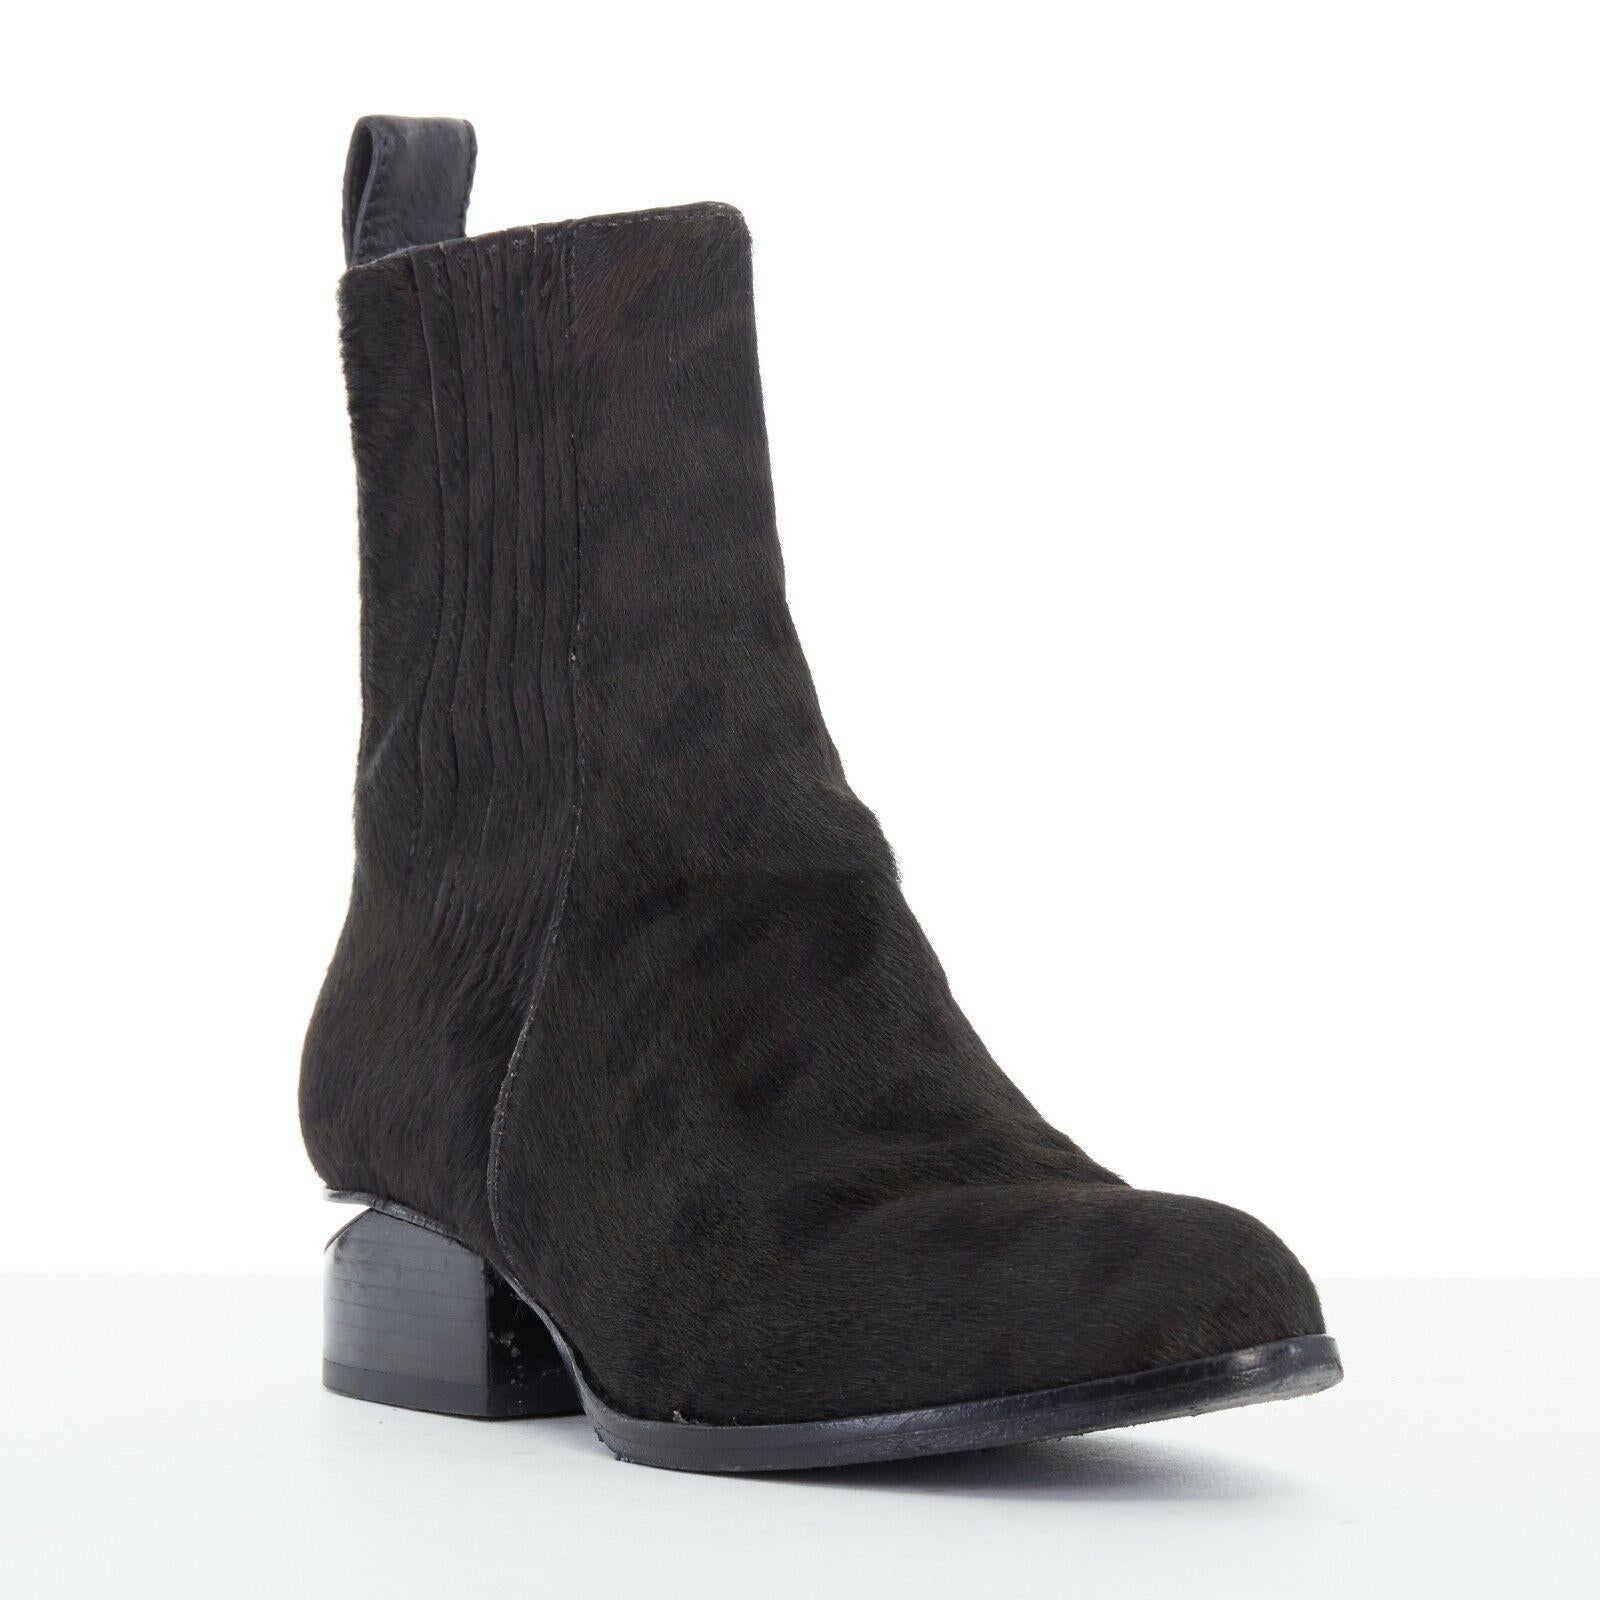 ALEXANDER WANG Anouk black leopard print pony leather cut out heel boot EU35 US5

ALEXANDER WANGAnouk ankle boot. Black and grey leopard print pony skin leather upper. Almond toe. Stretch insert on side for fit. Slip on. Black stacked wooden heel.